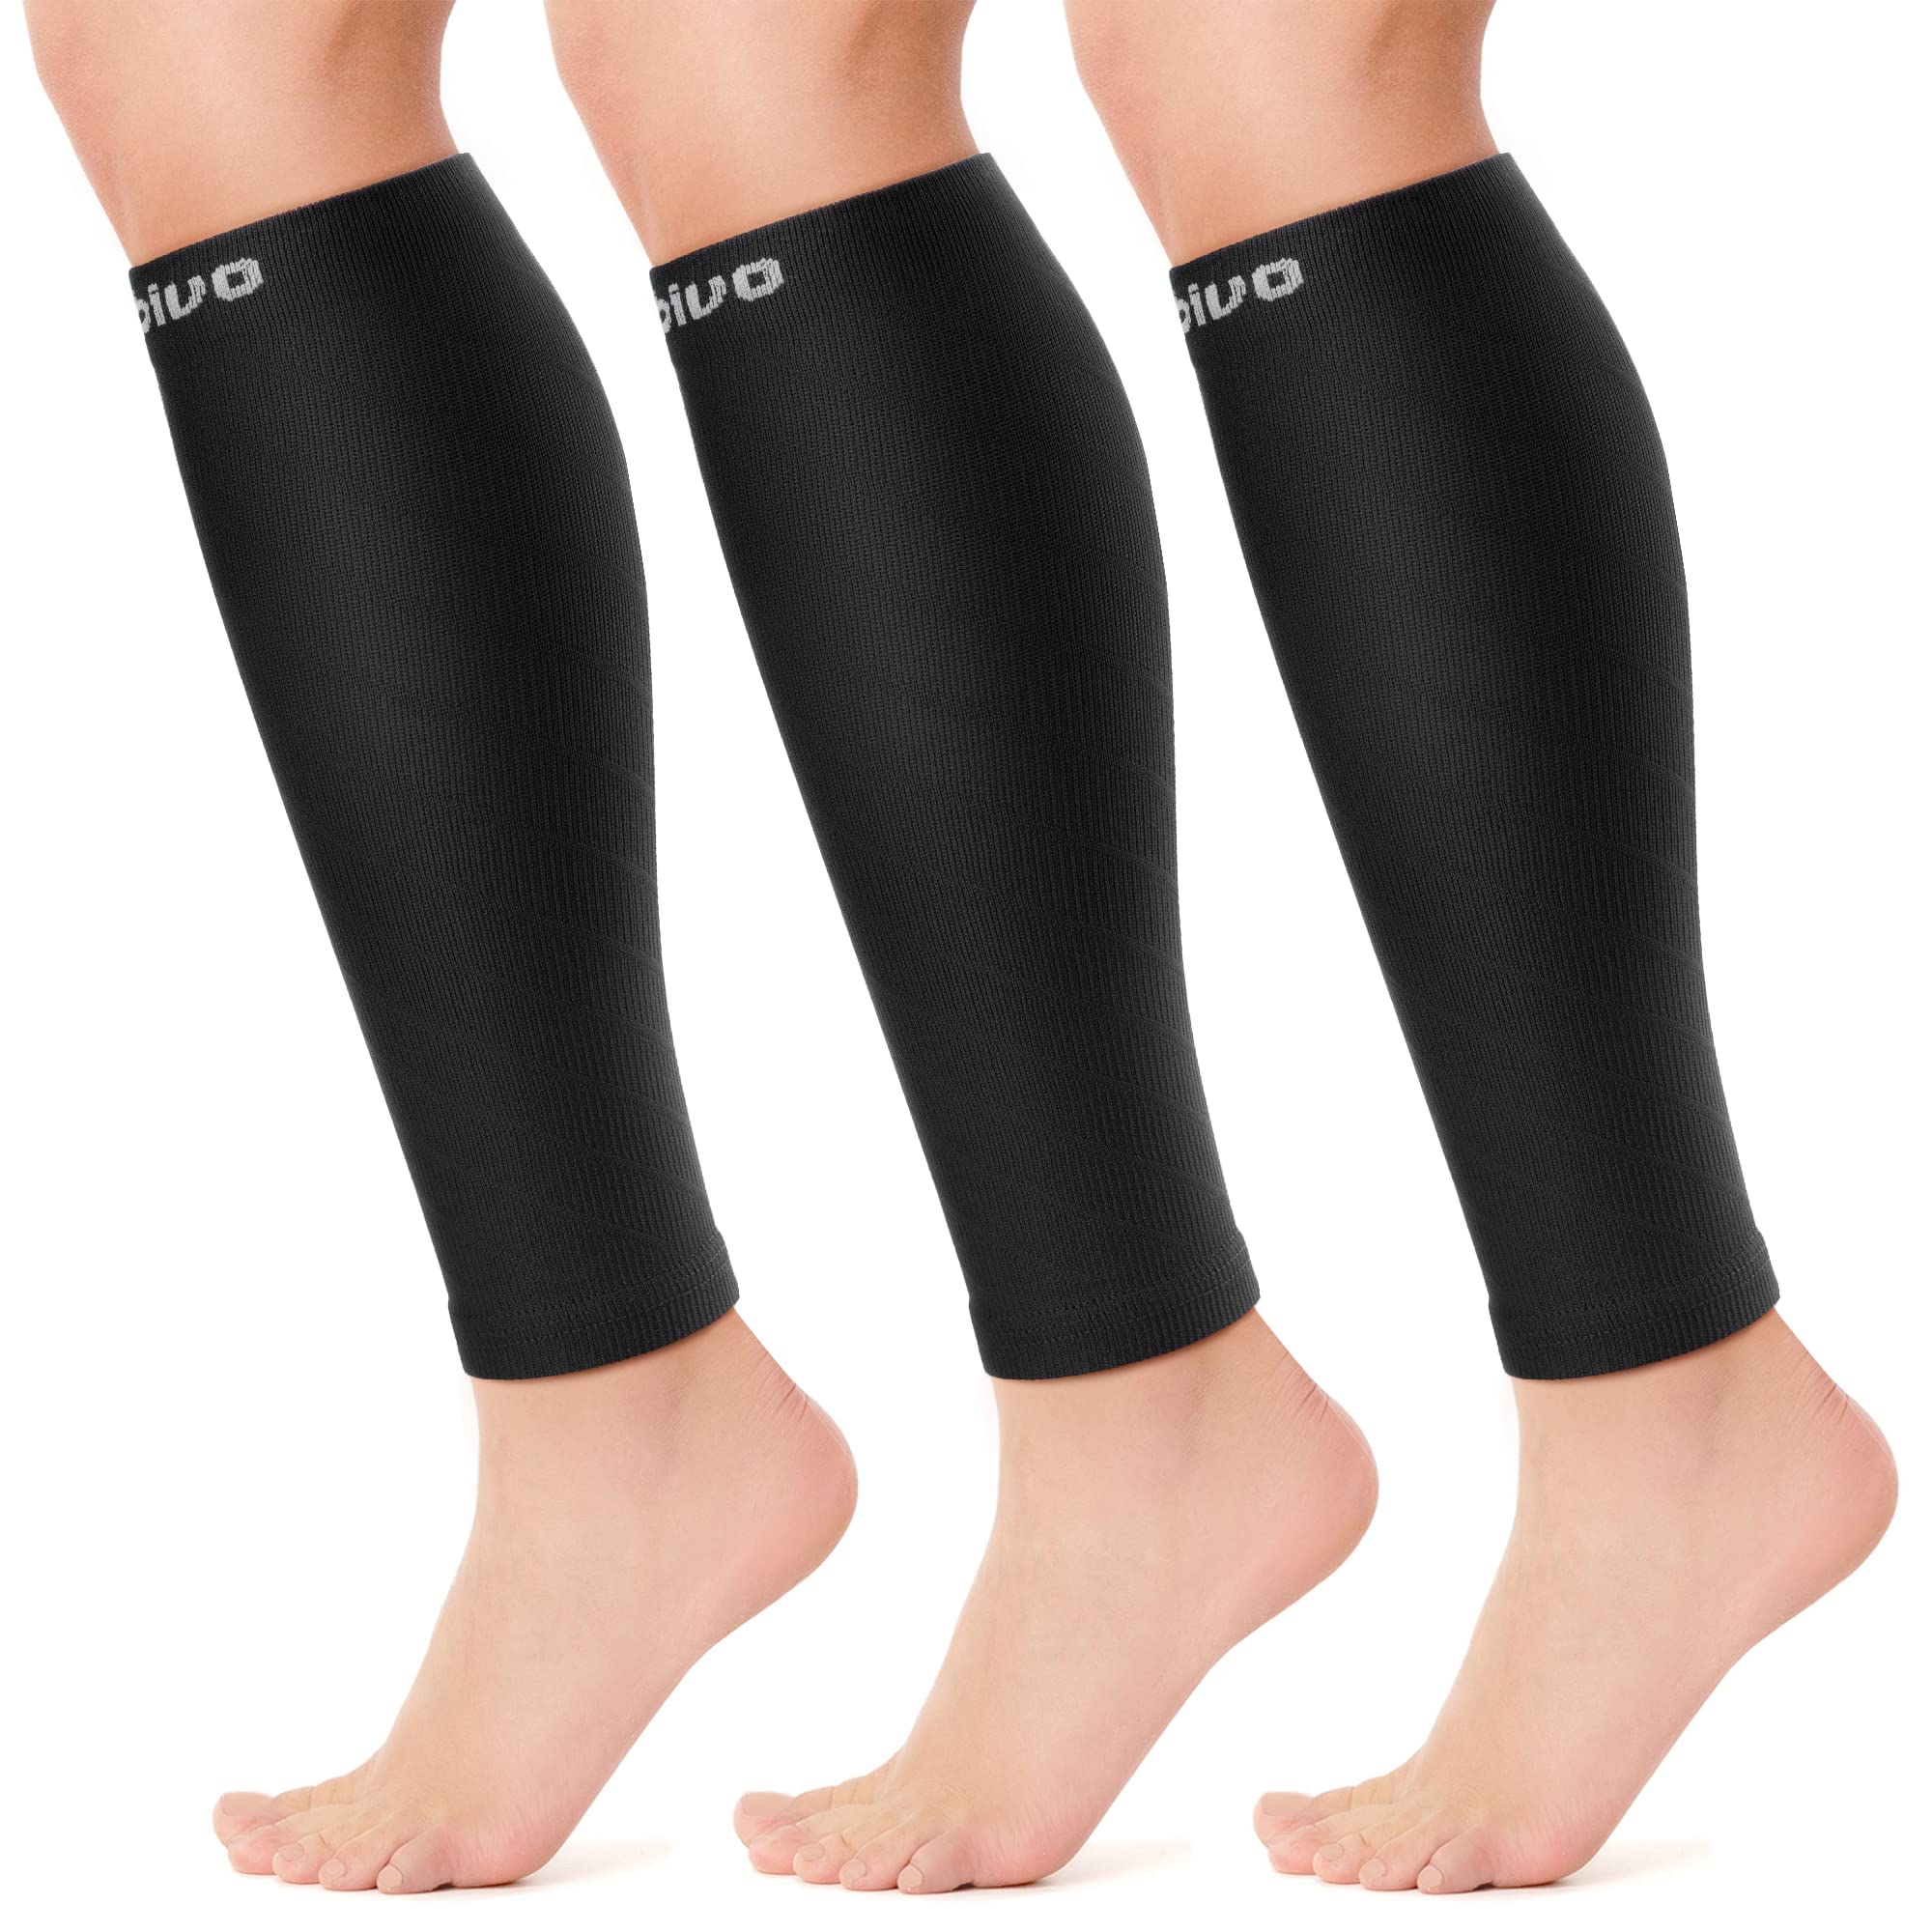 CAMBIVO 3 Pairs Calf Compression Sleeves for Men and Women, Varicose Vein  Treatment for Leg Pain Relief, Leg Brace for Shin Splint Support, Footless  Compression Socks for Running, Football, Nurses, Pregnancy(Pure Black